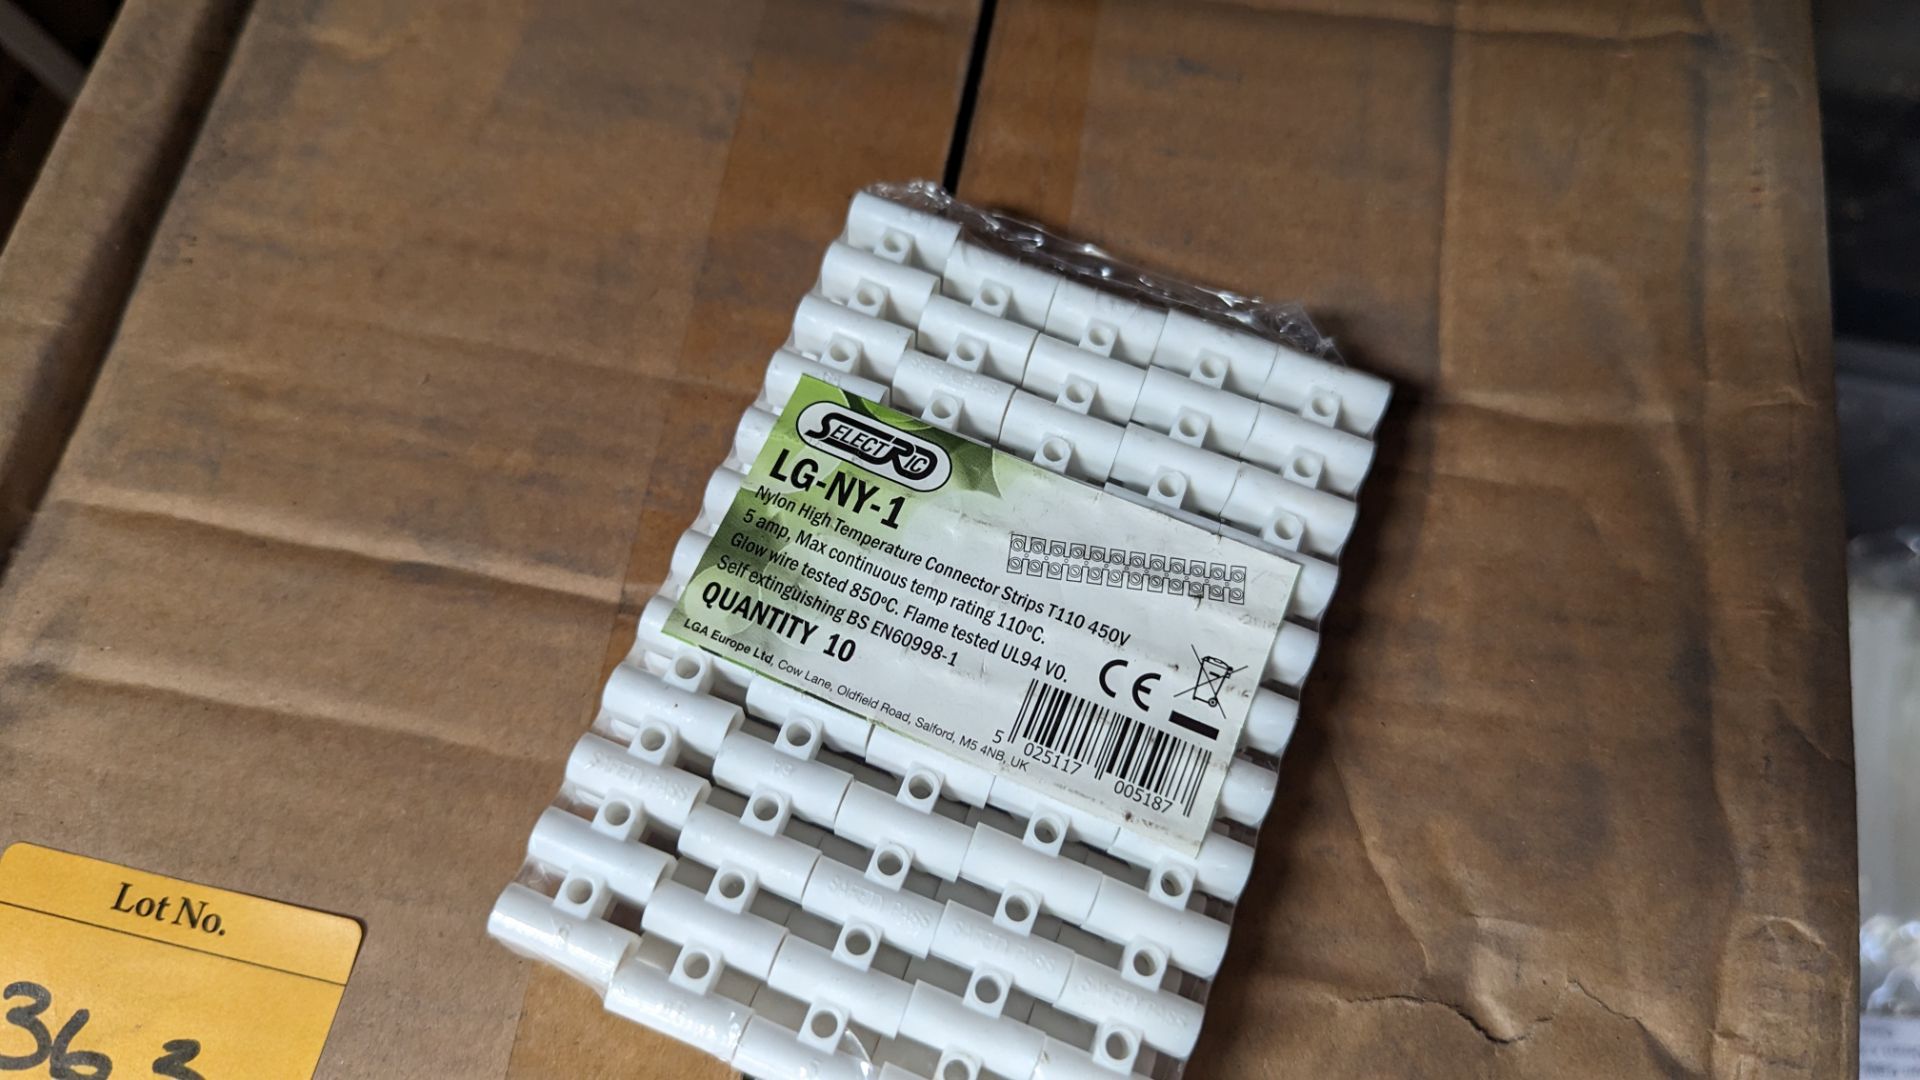 2 boxes (2,000 pieces total) of Selectric LG-NY-1 nylon high temperature connector strips, 5 amp - Image 4 of 4